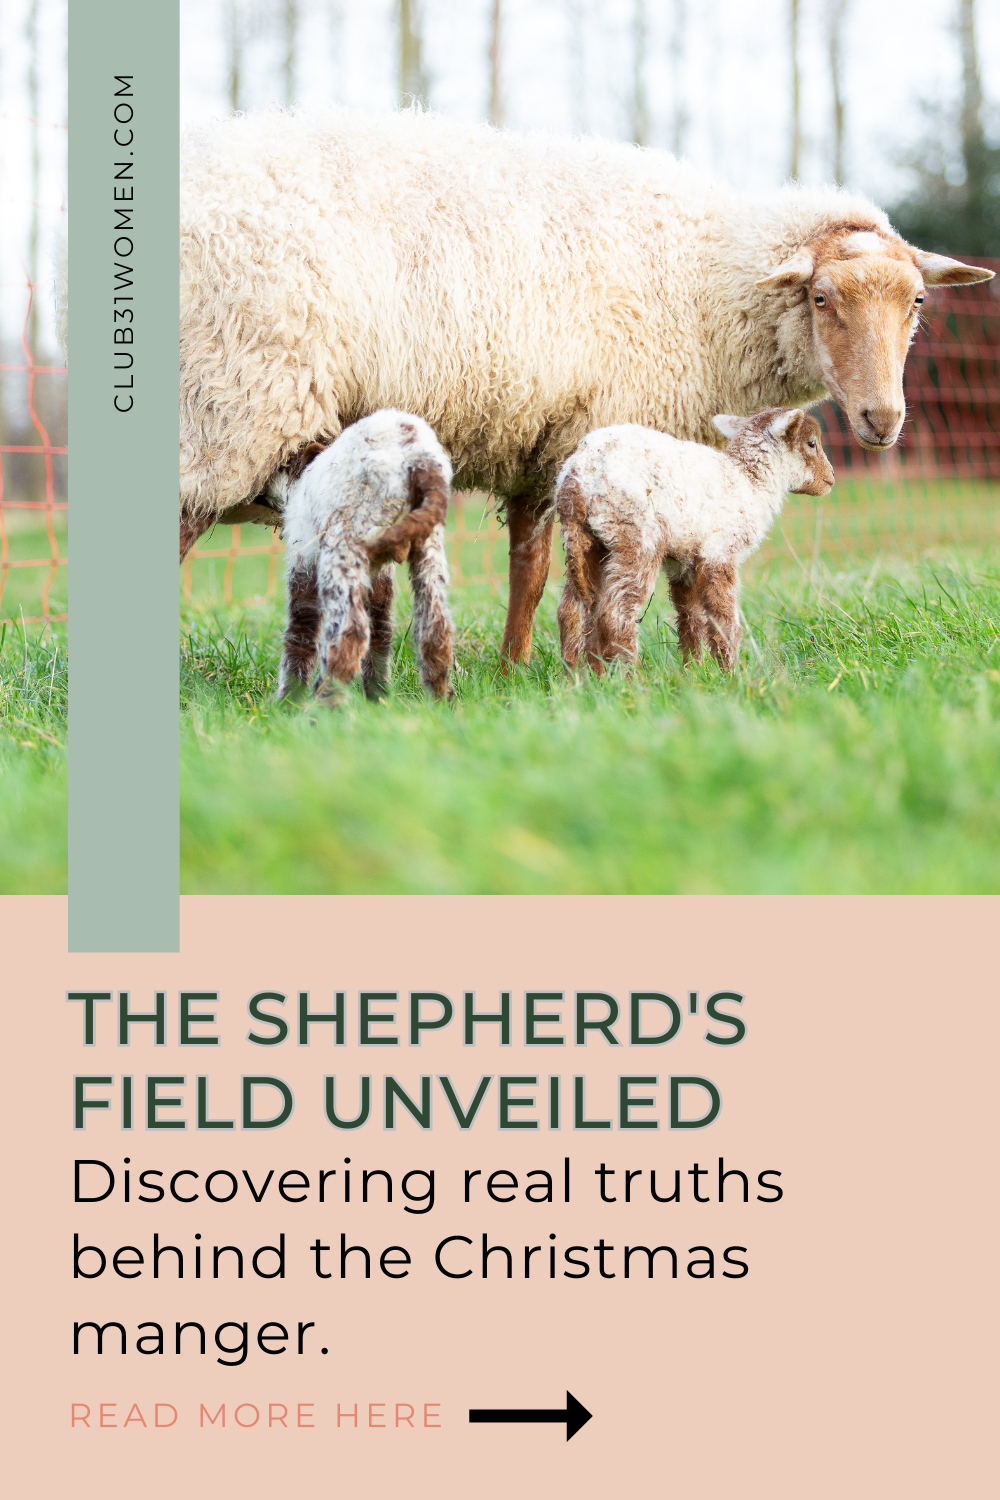 The Shepherd’s Field Unveiled: Rediscovering Deeper Christmas Truths via @Club31Women